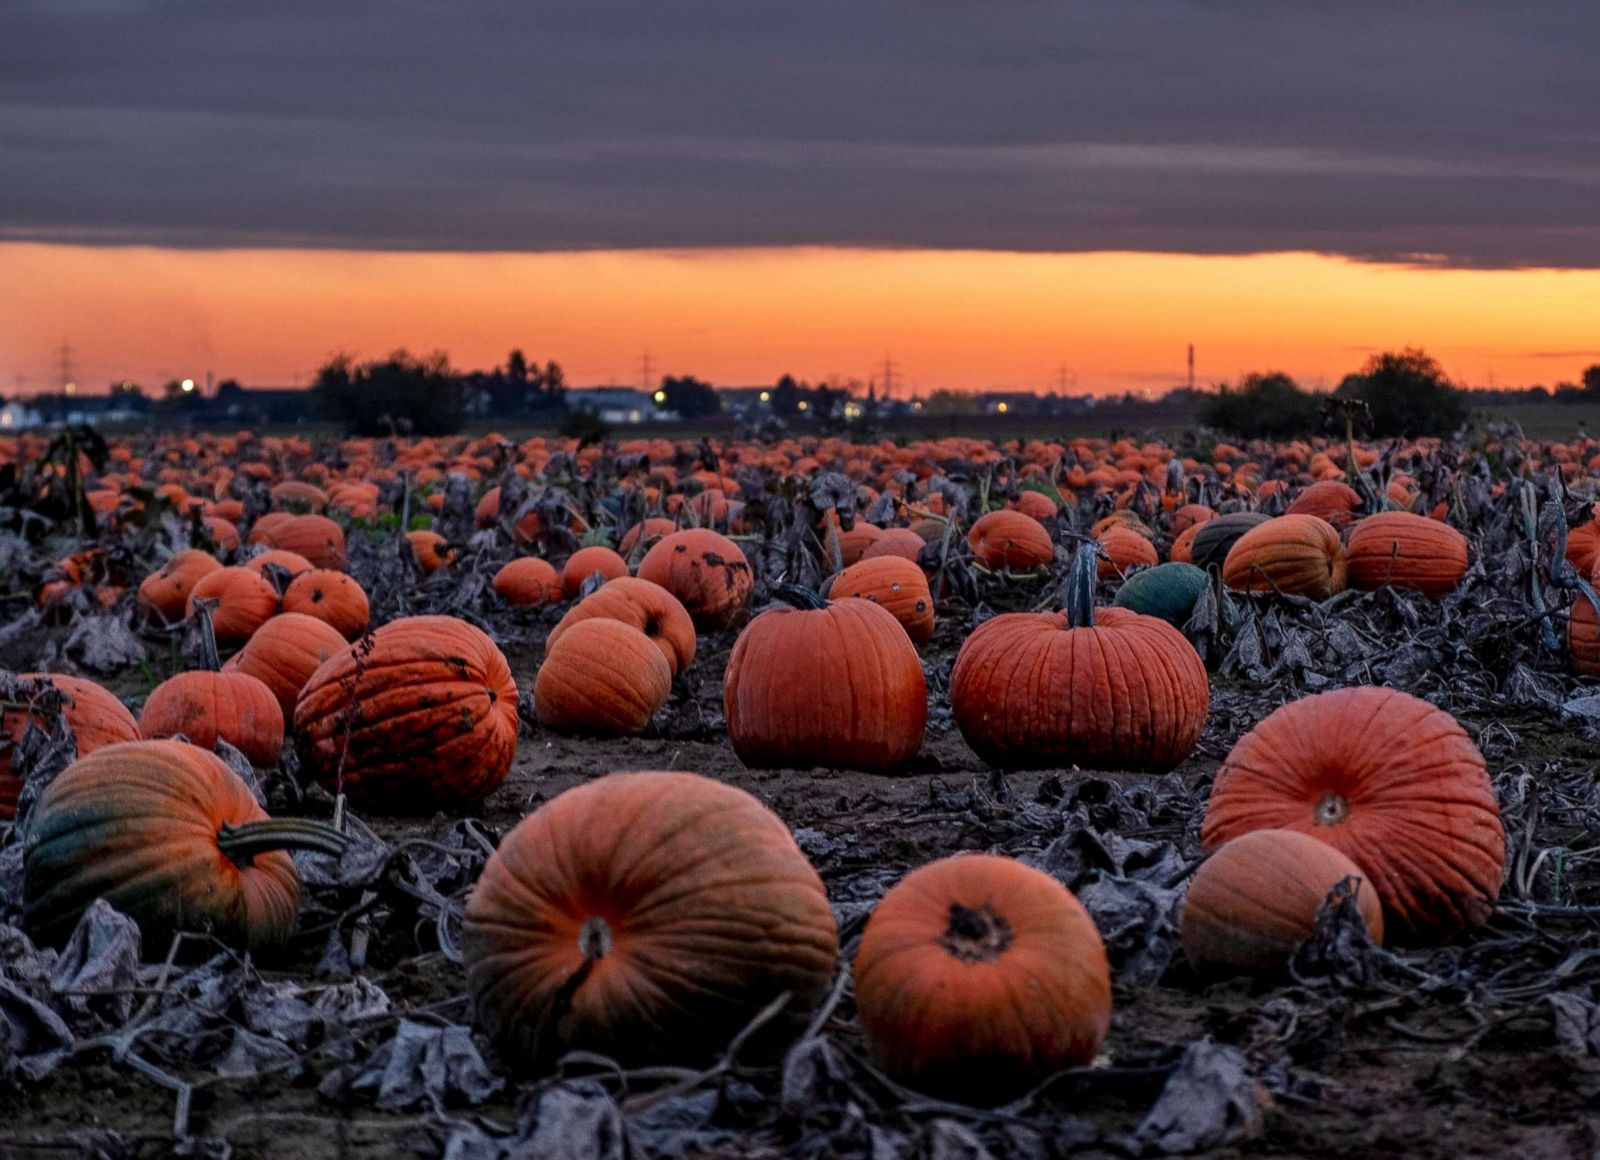 Celebrating fall in pictures Photos - ABC News